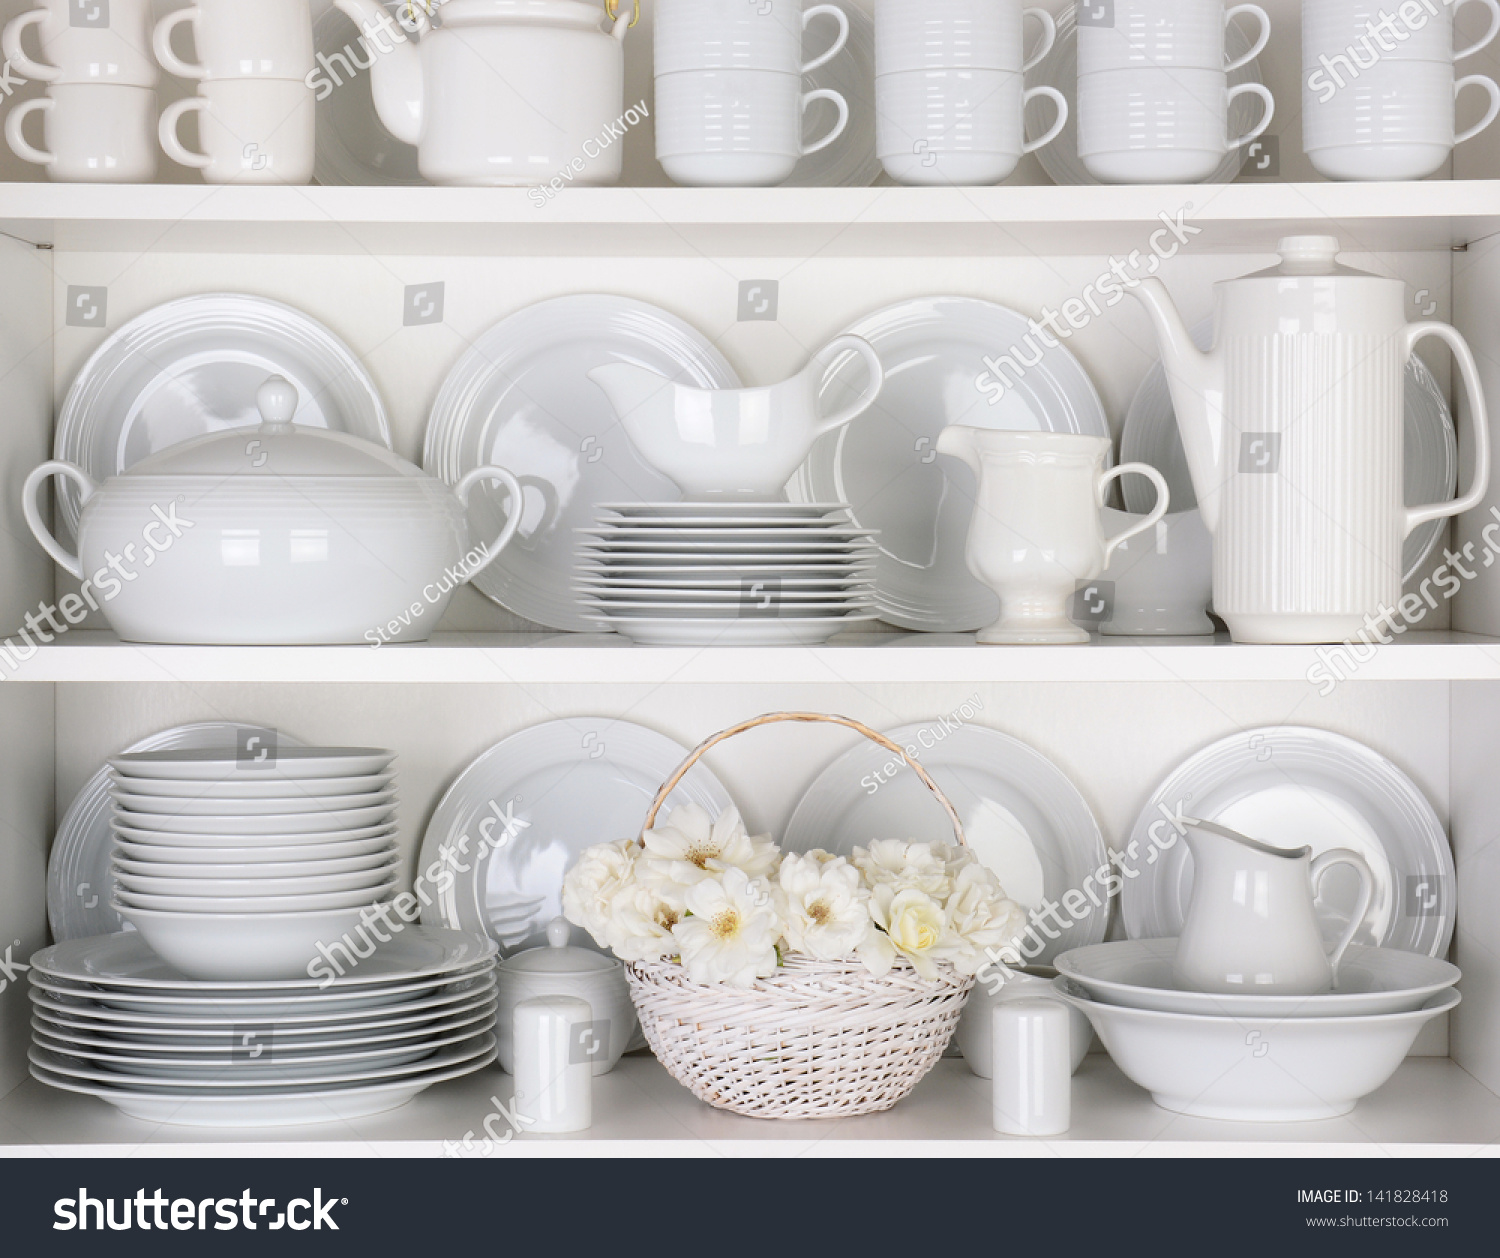 Closeup of white plates and dinnerware in a cupboard. A basket of white roses is centered on the bottom shelf. Items include, plates, coffee cups, saucers, soup tureen, tea pot, and gravy boats. #141828418